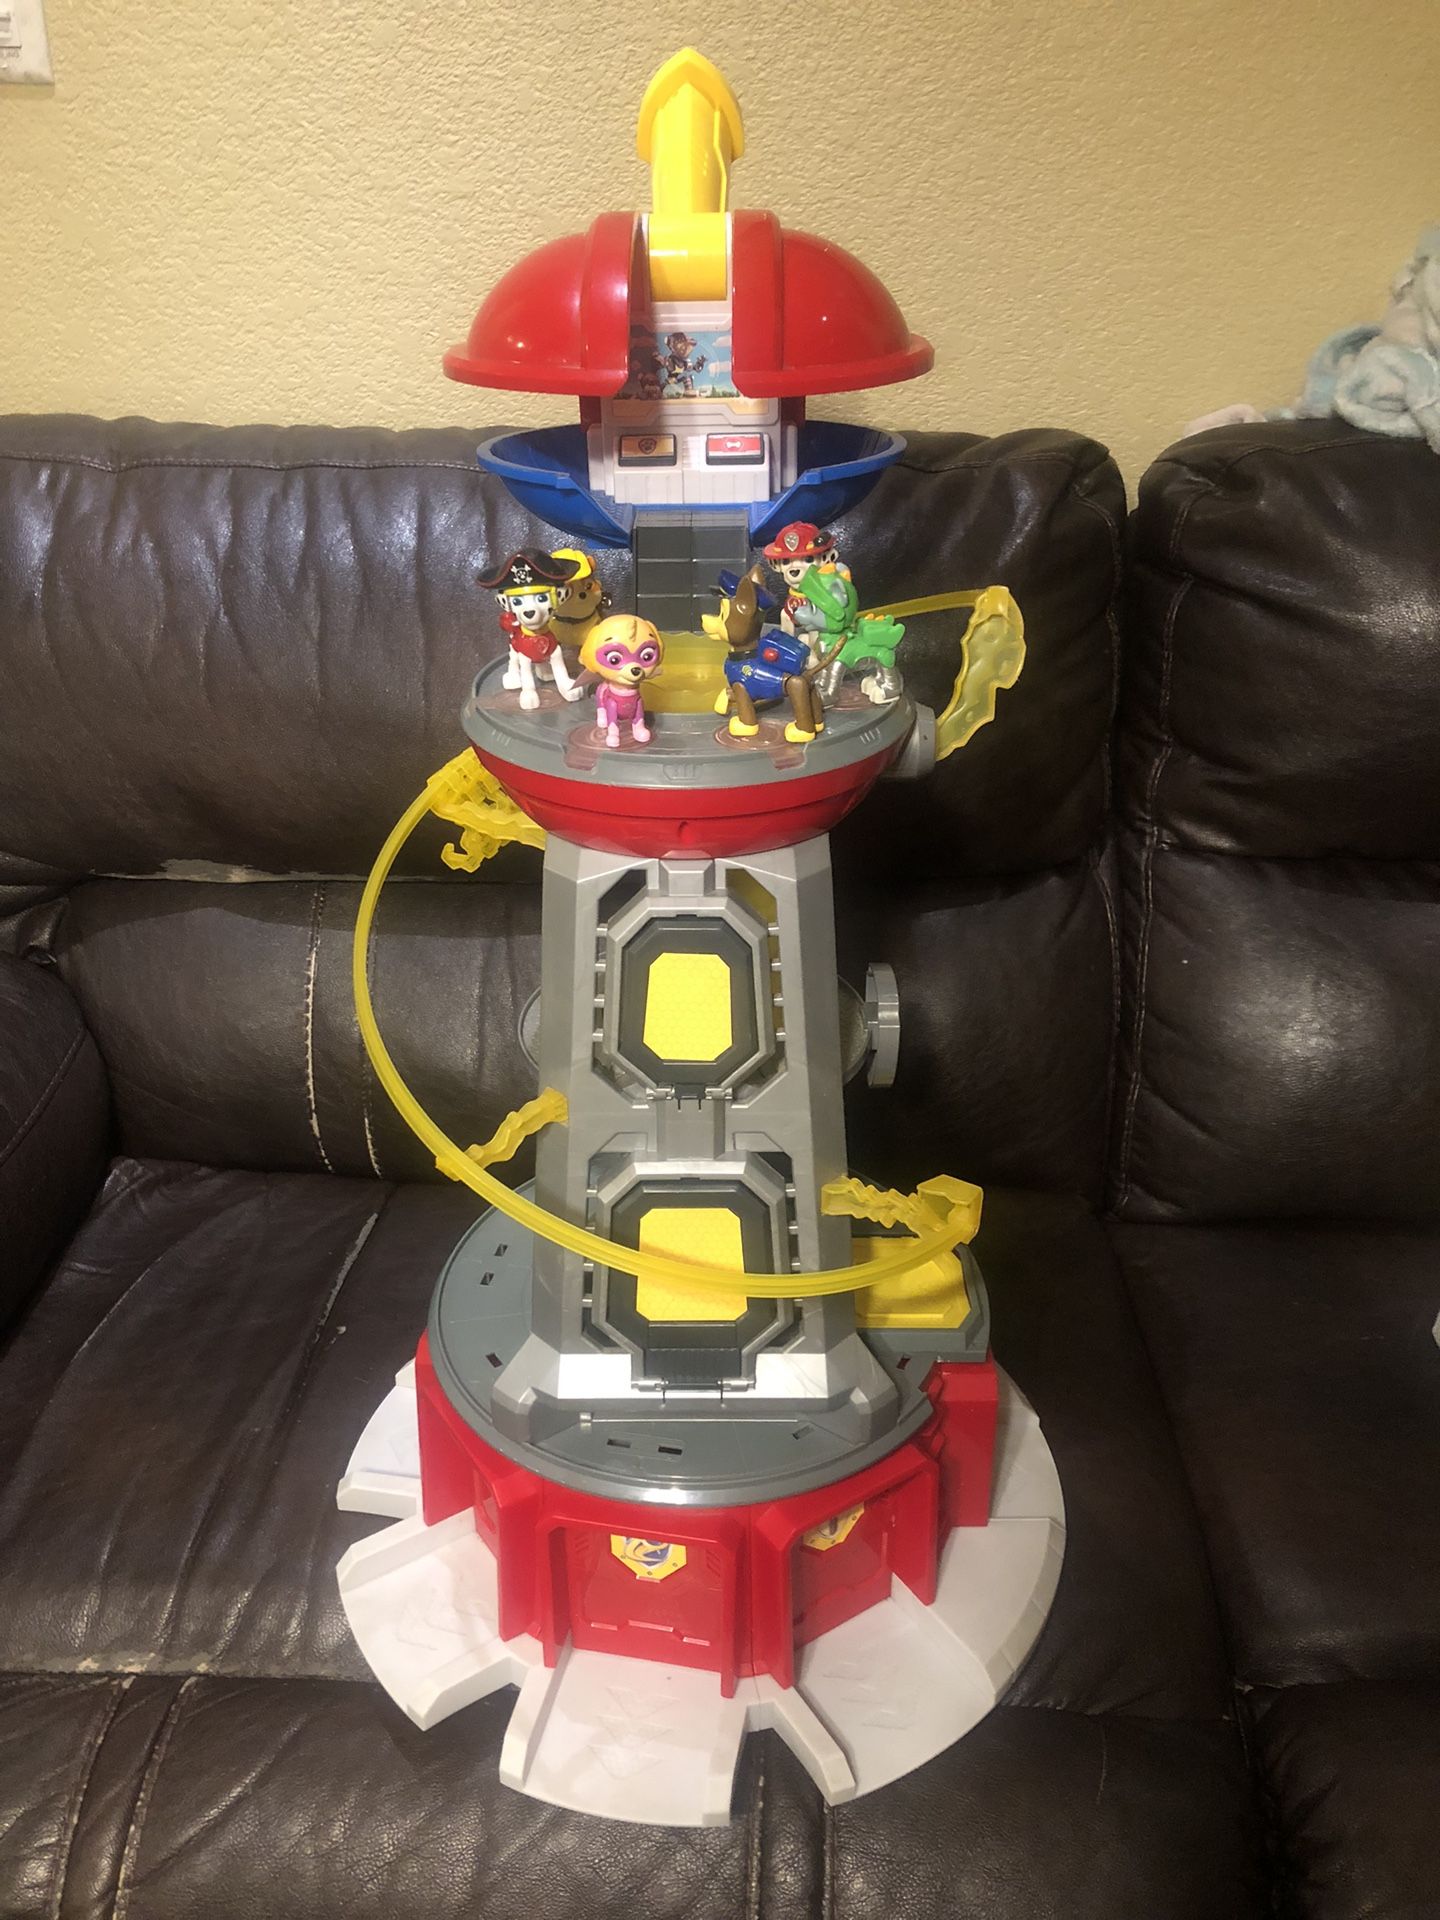 Paw Patrol Mighty Lookout Tower